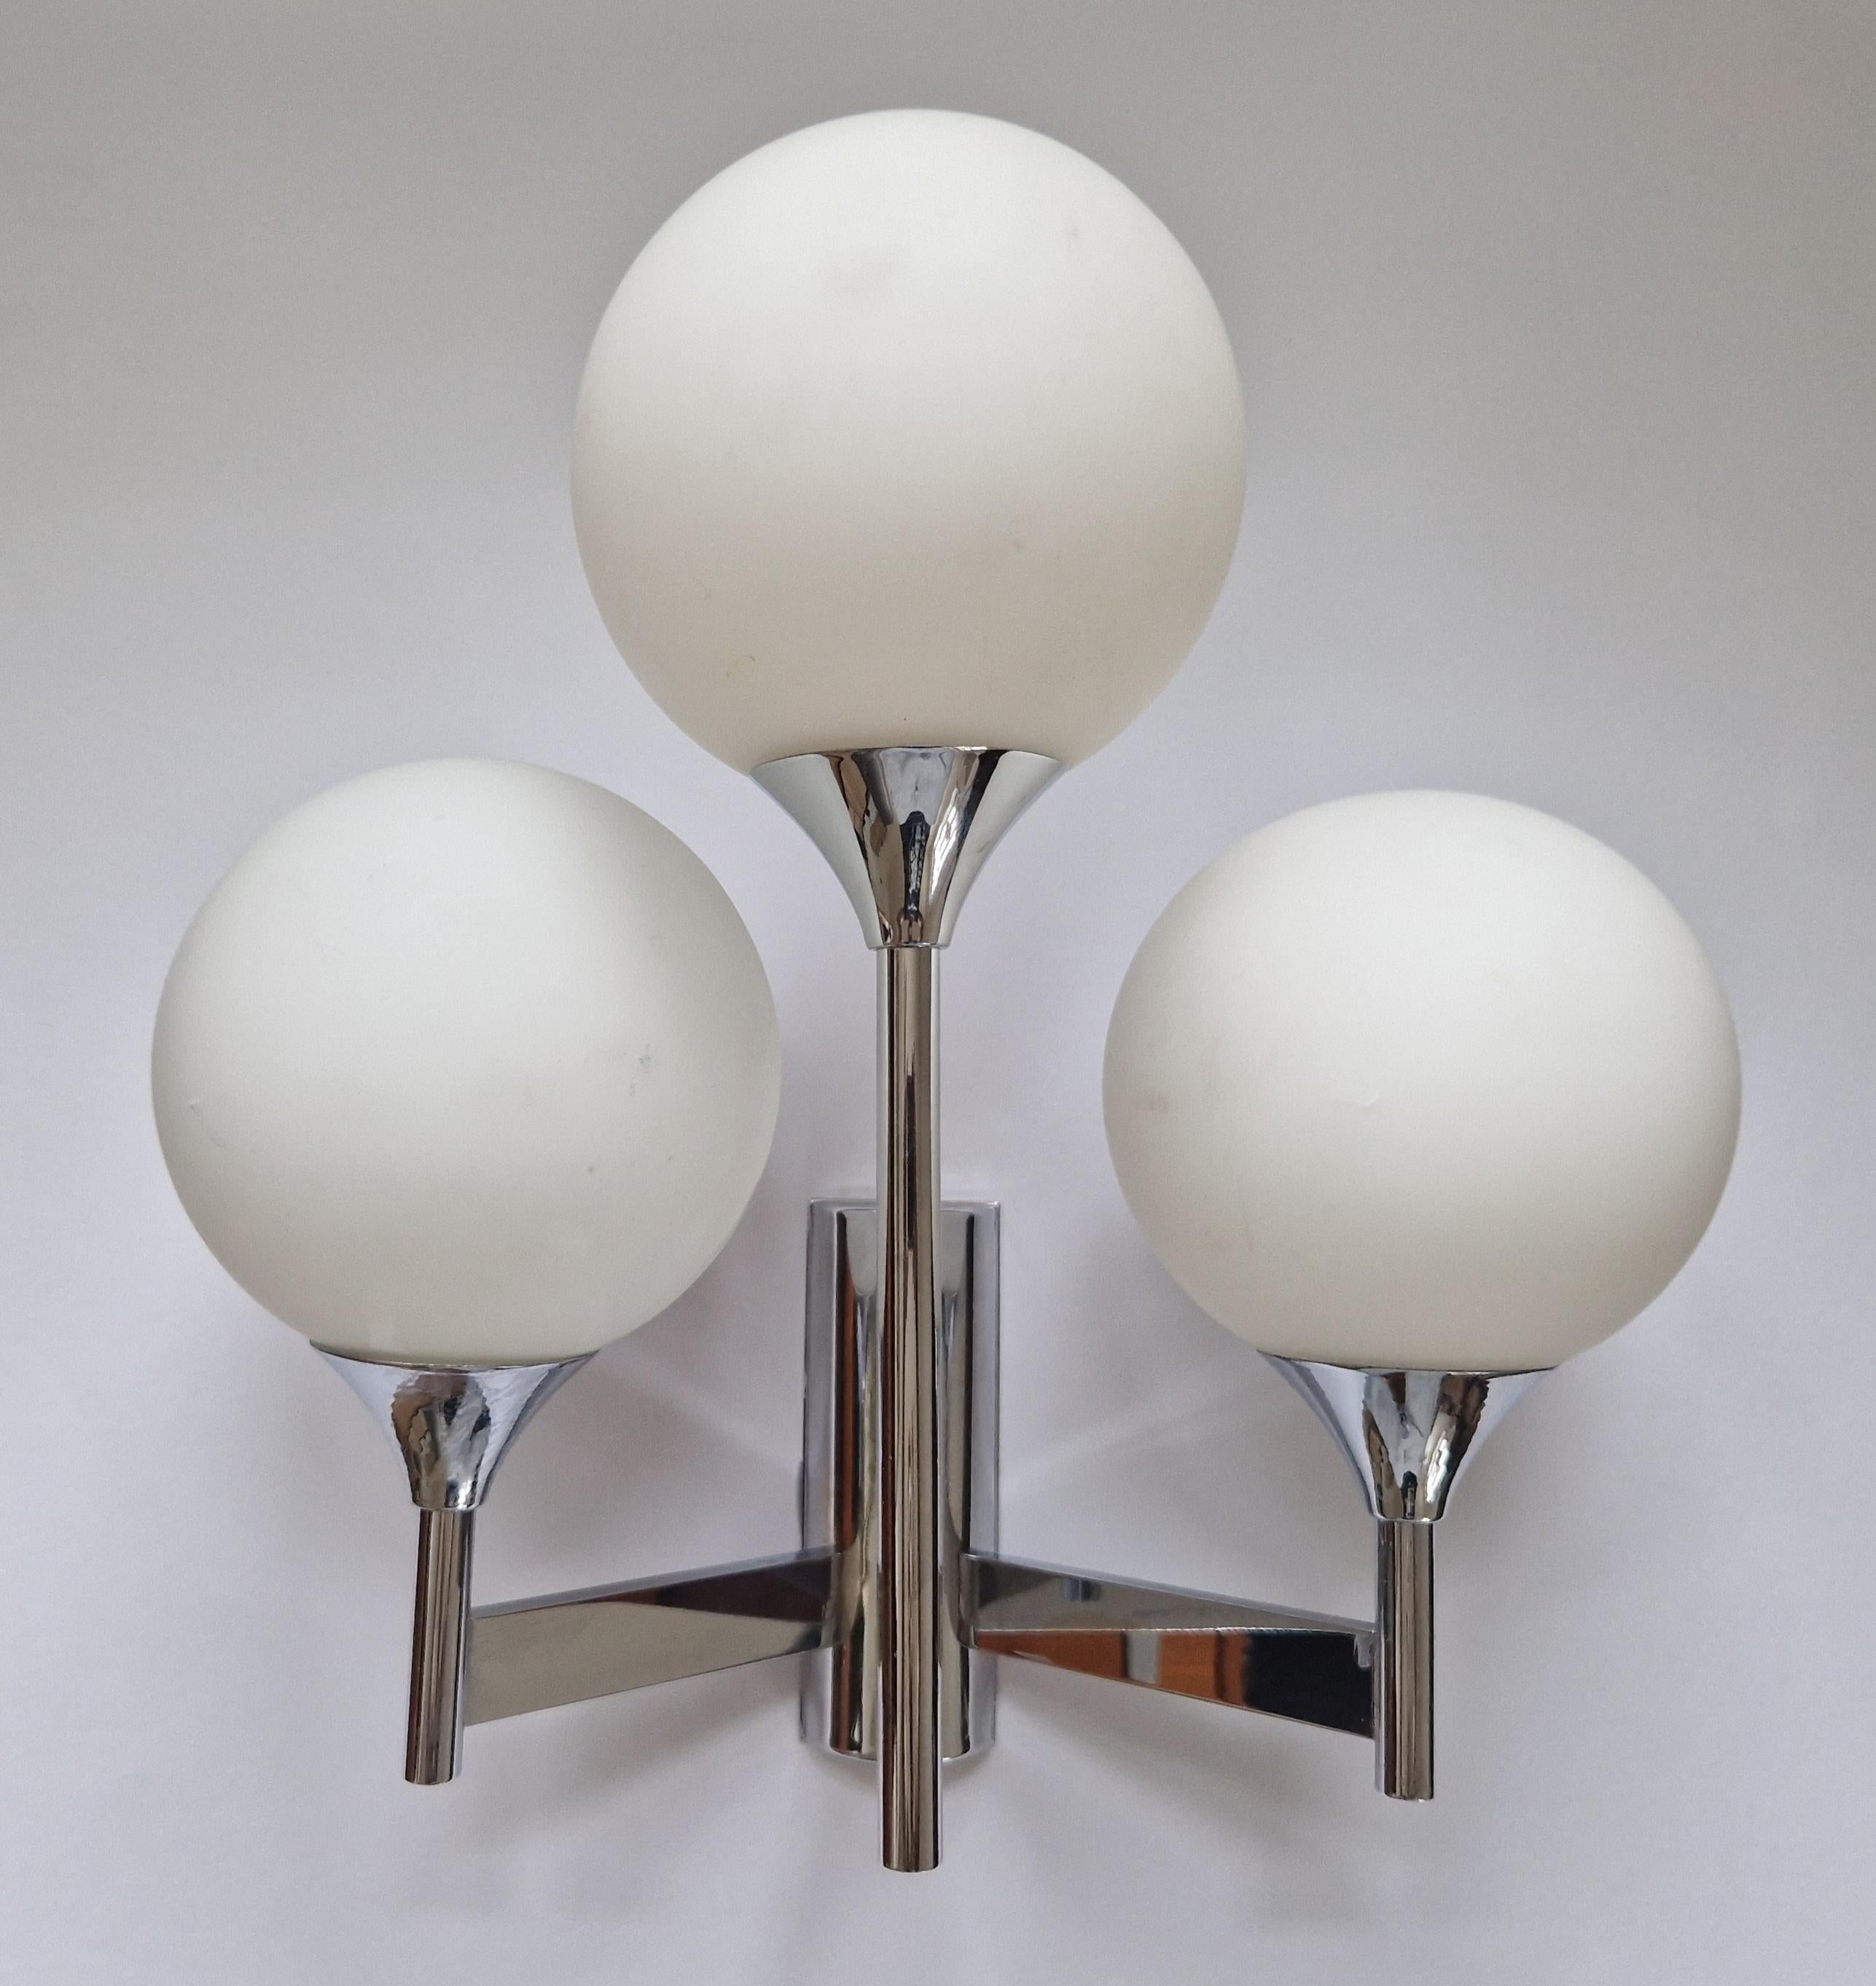 Midcentury Wall Lamp designed by Gaetano  For Sale 2